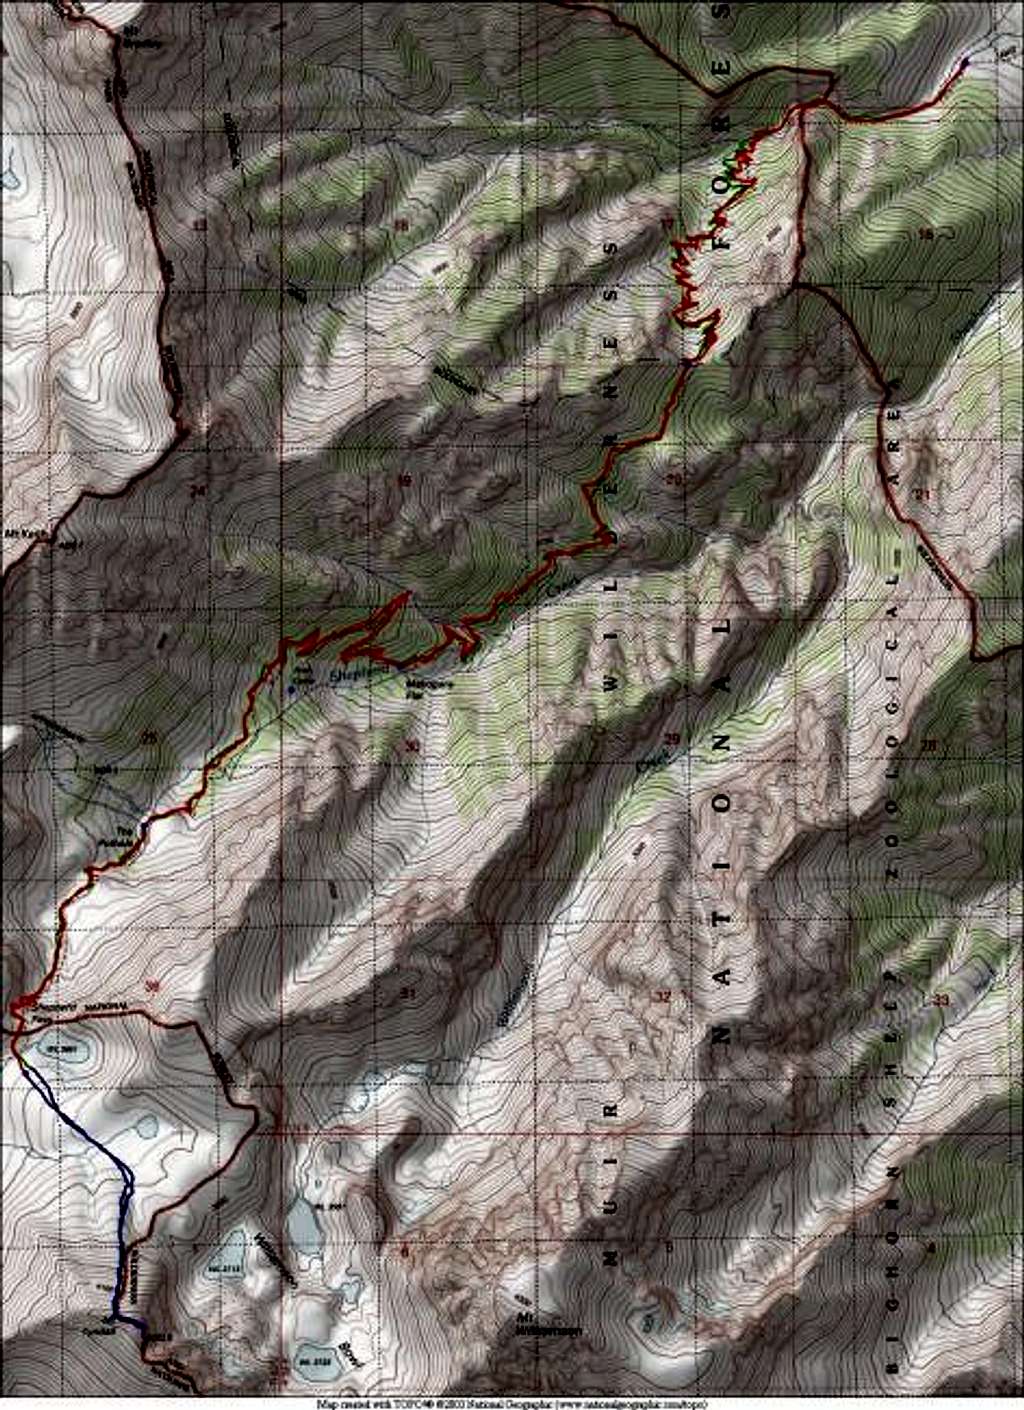 6/27/04 - Topo map showing...